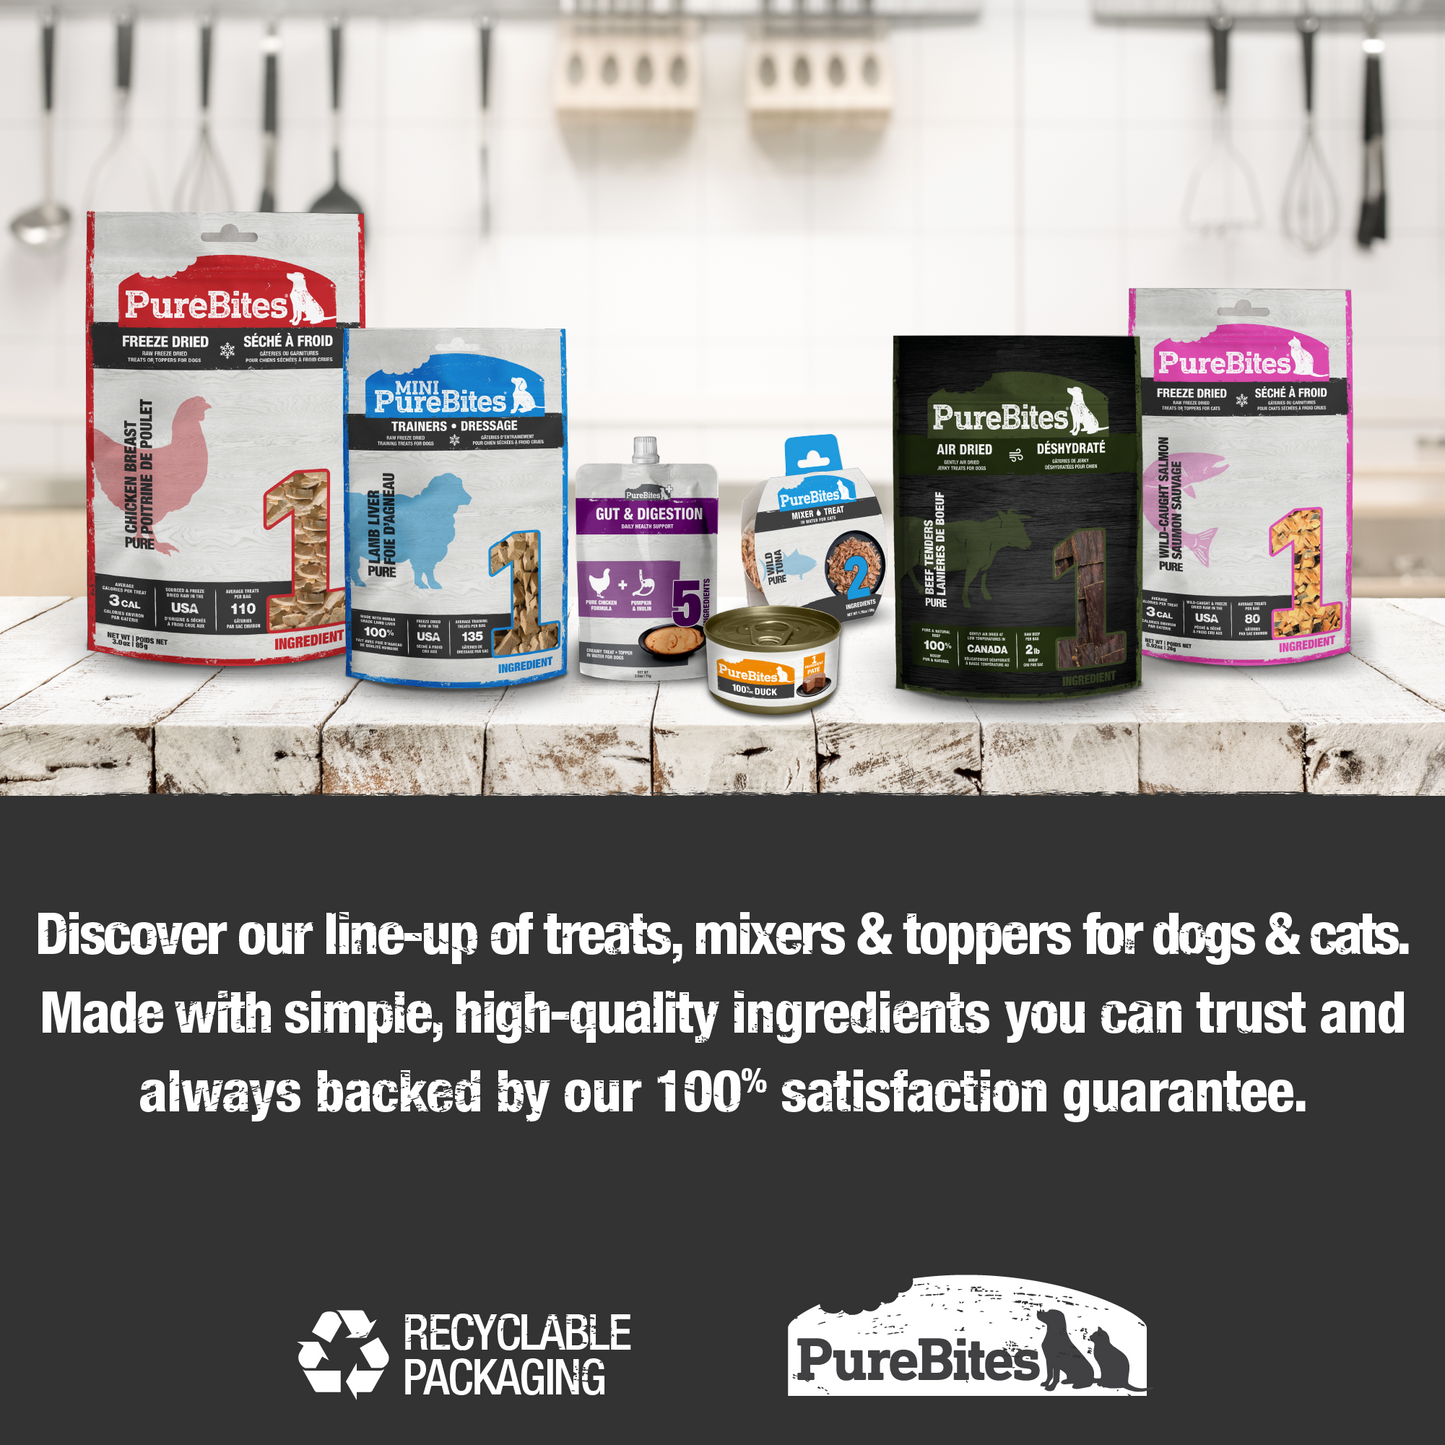 Image of the full lineup of PureBites products